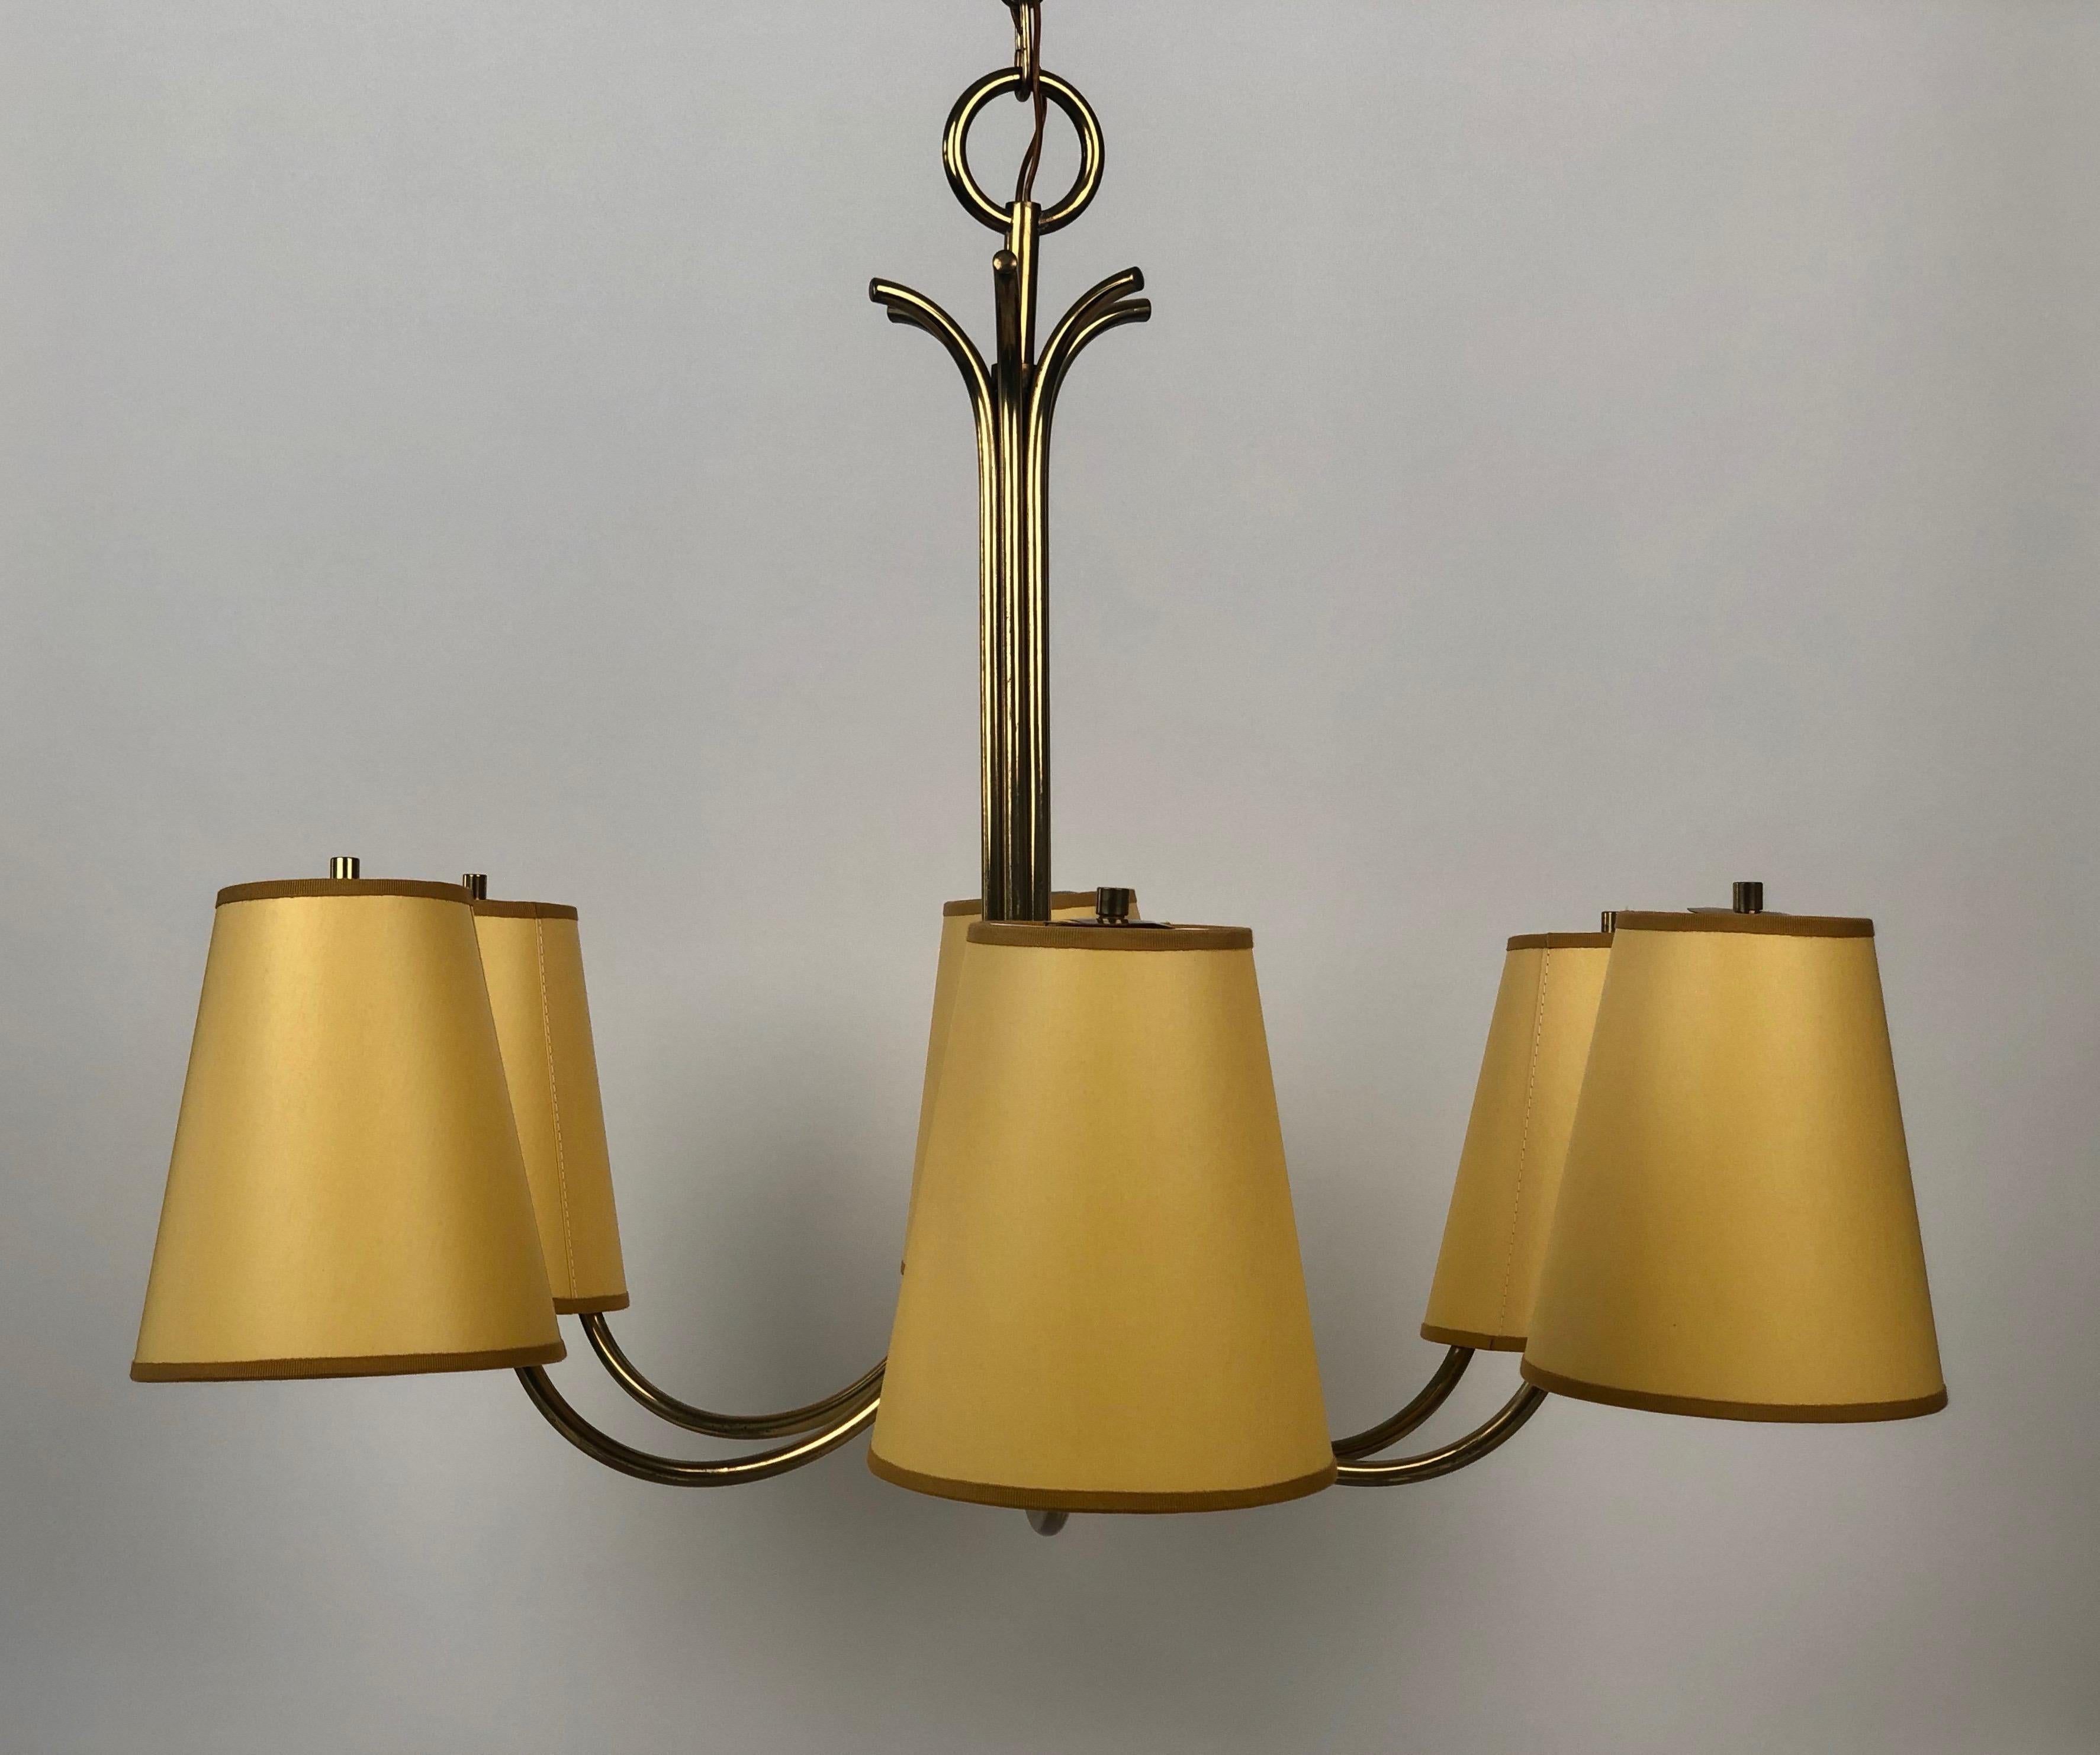 Large chandelier  in brass with six arms, designed by Josef Frank in the 1950's, Austria.
The silk shades in a yellow colour use the original metal construction. The electric has been controlled.